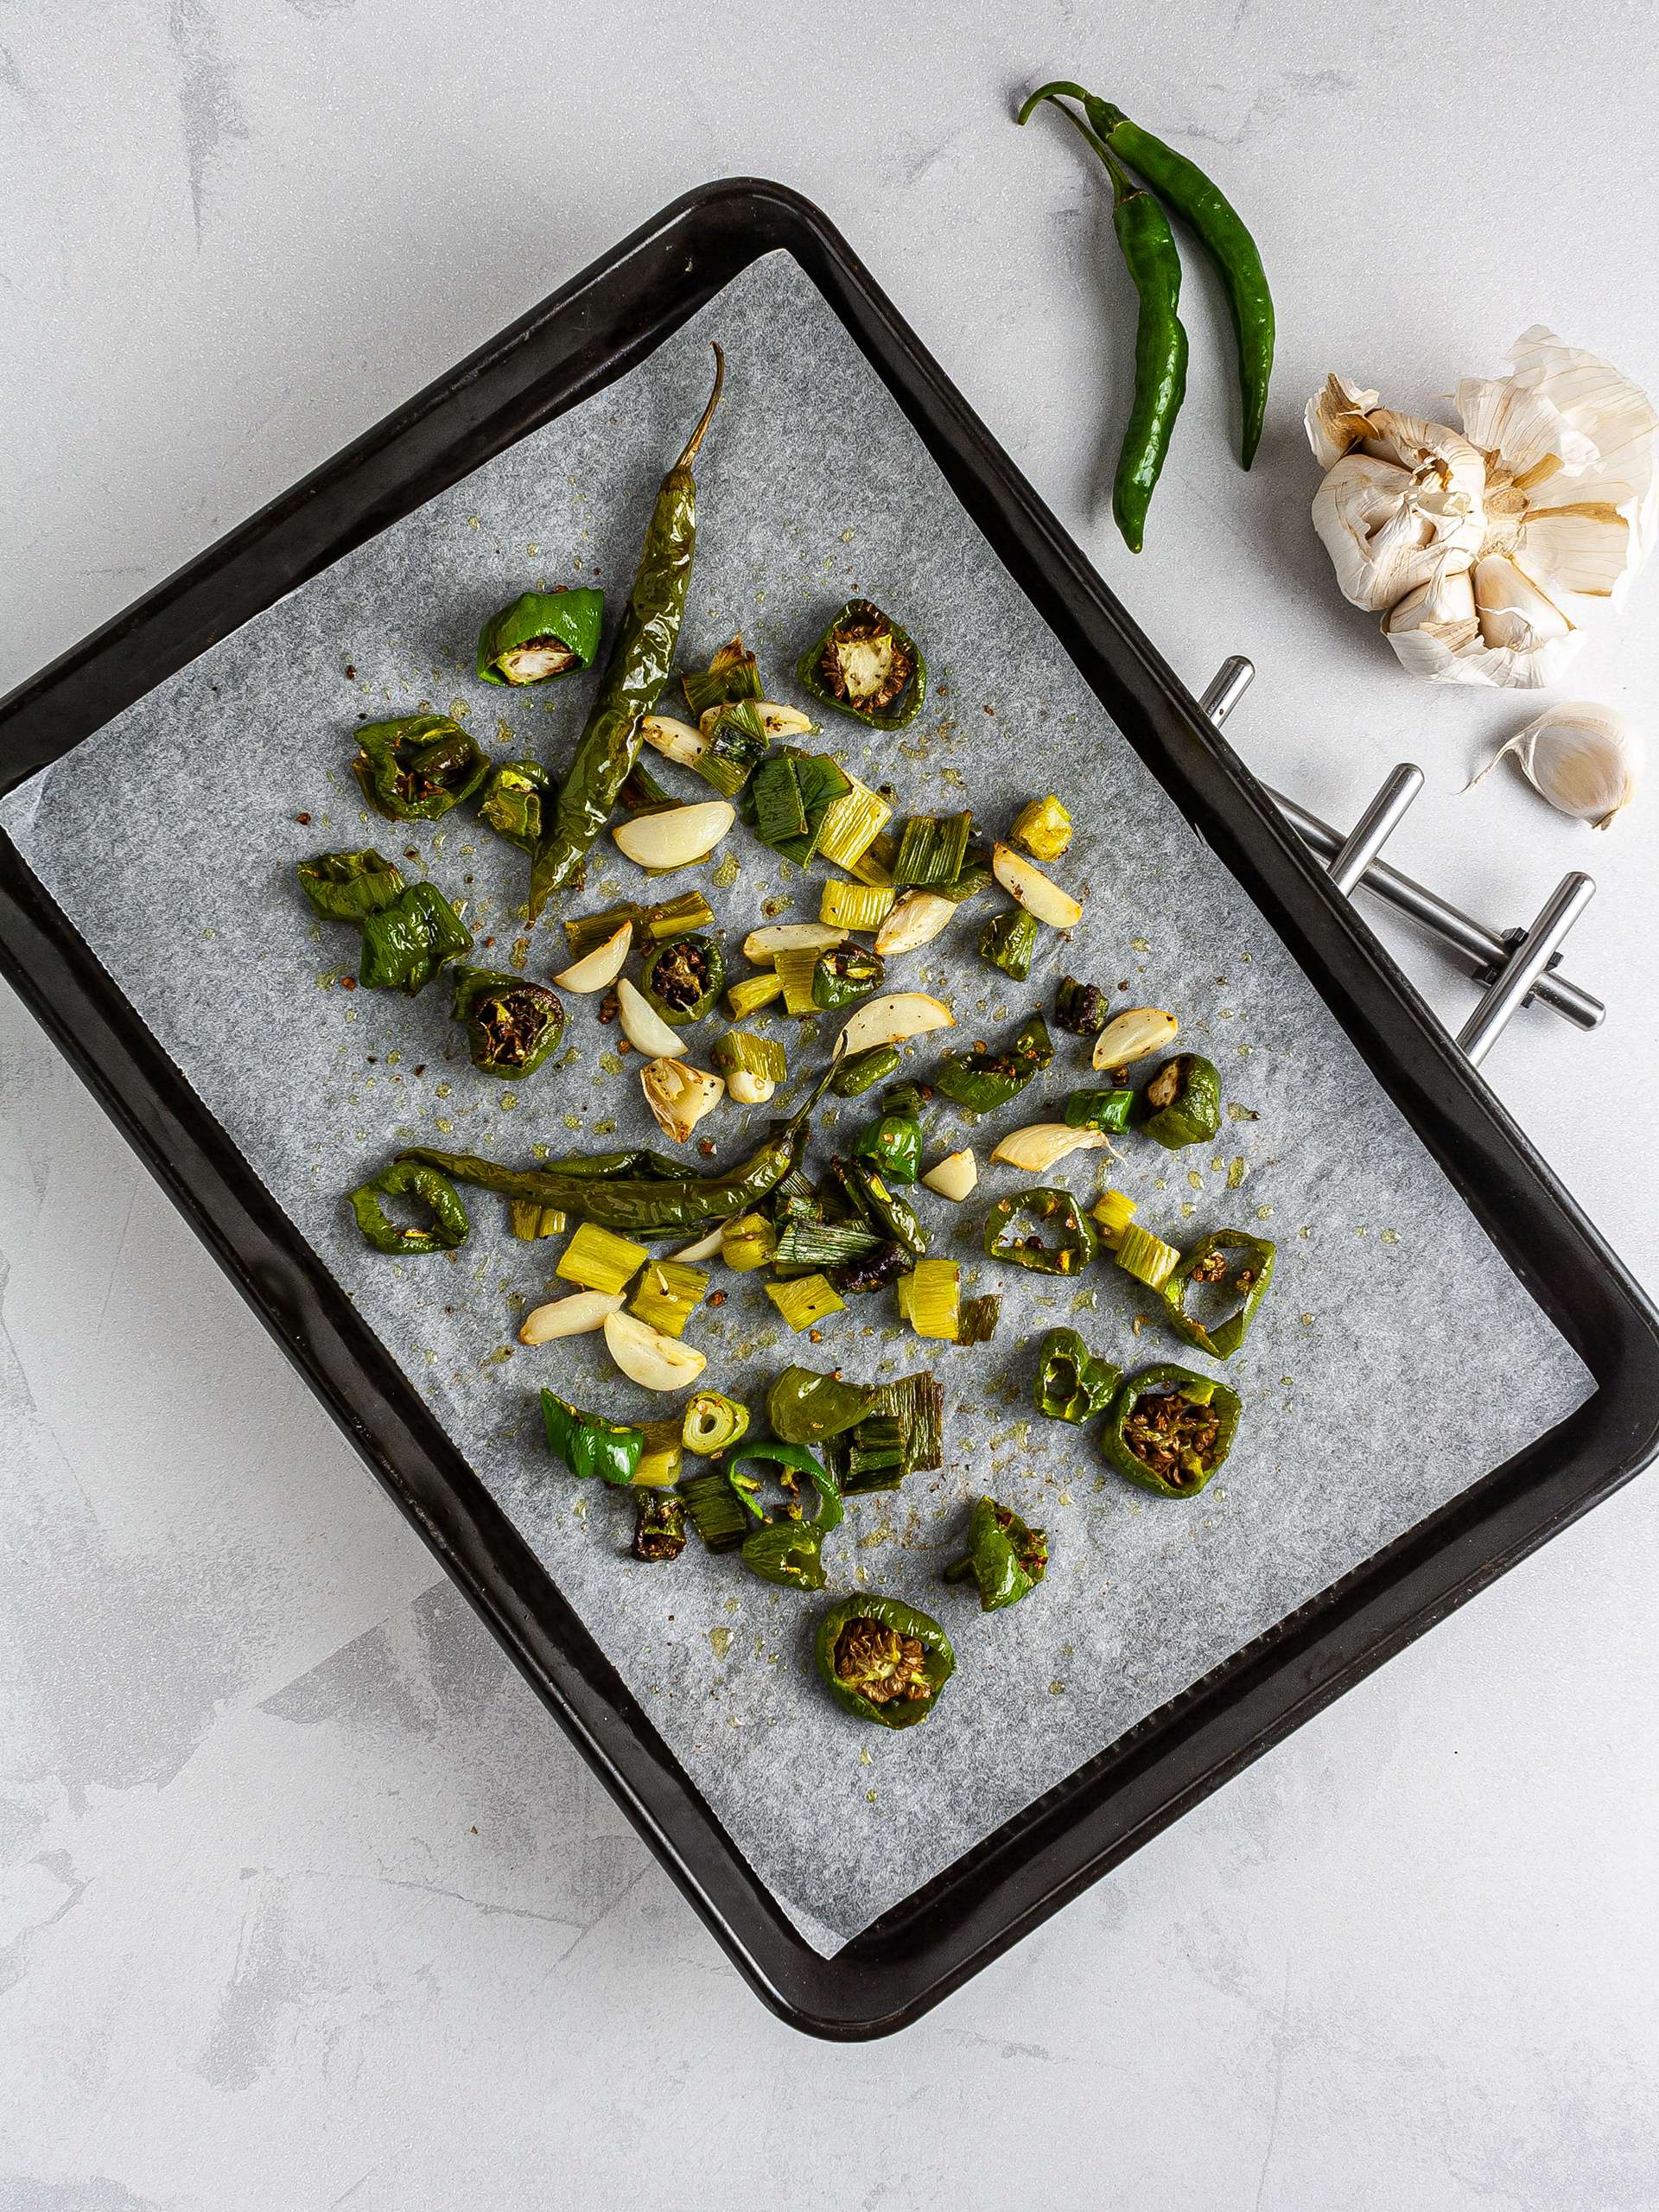 Roasted green chilli peppers with garlic and spring onions